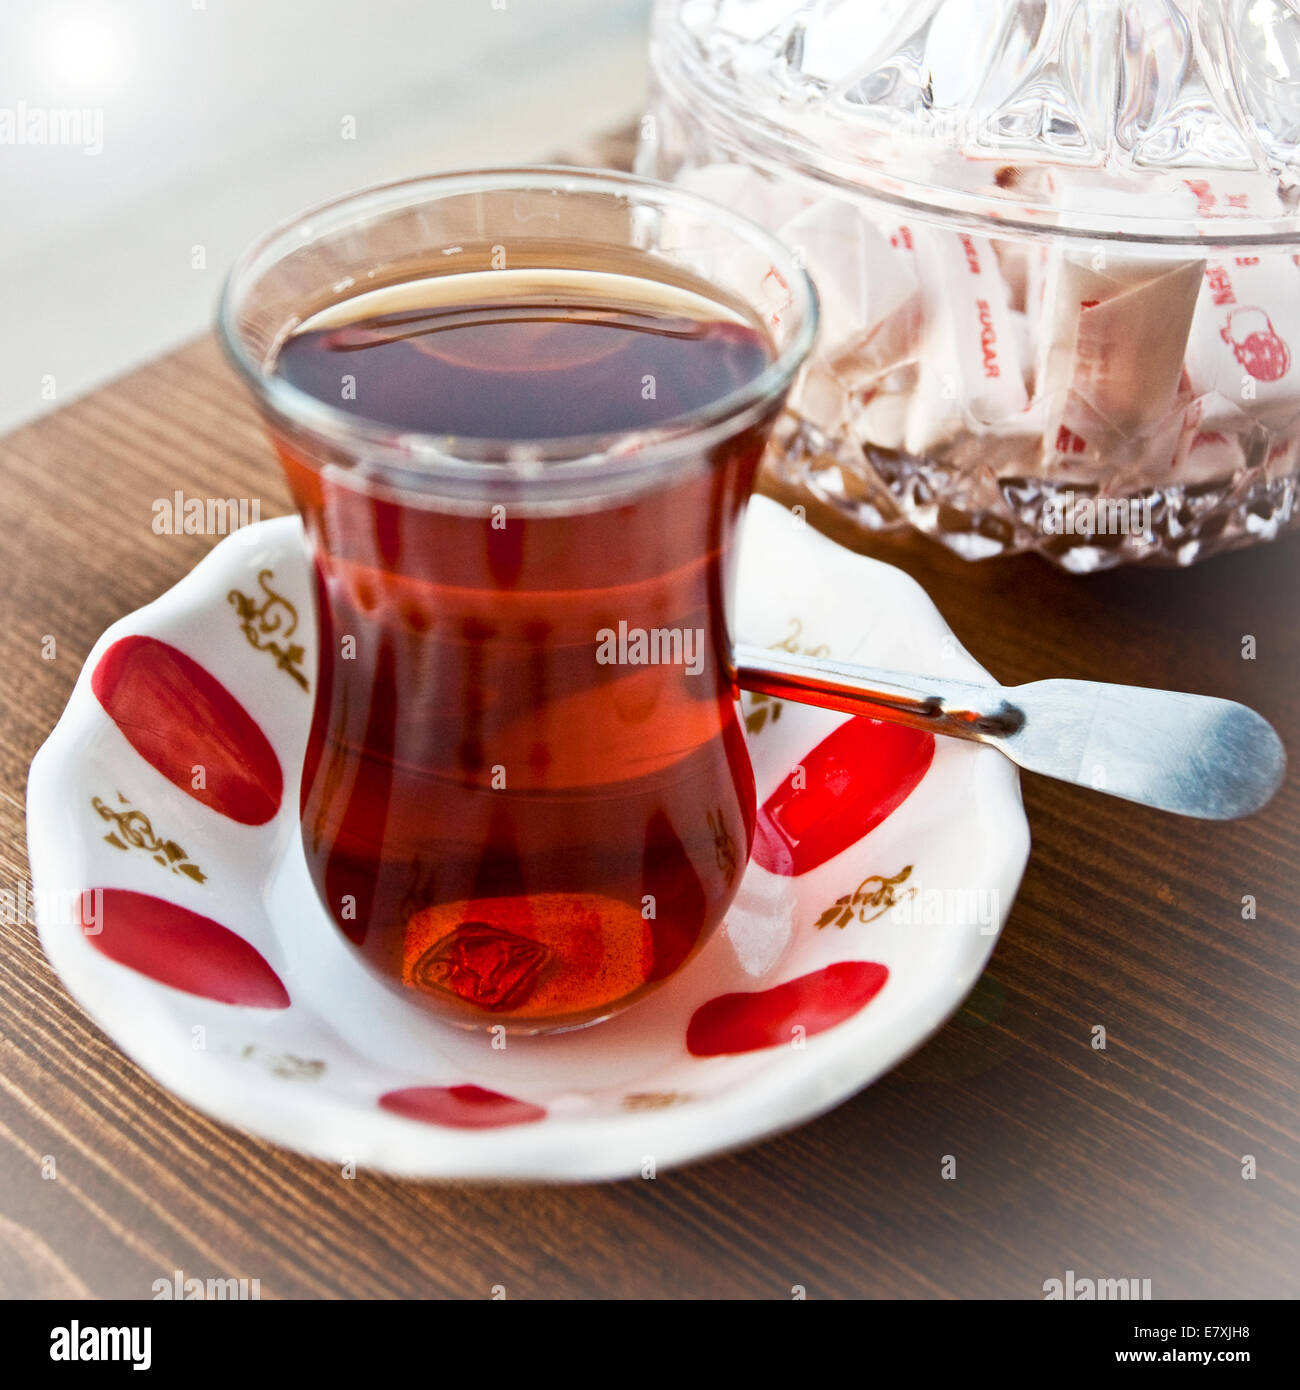 Turkish tea on saucer with spoon and sugar packets in background Stock Photo